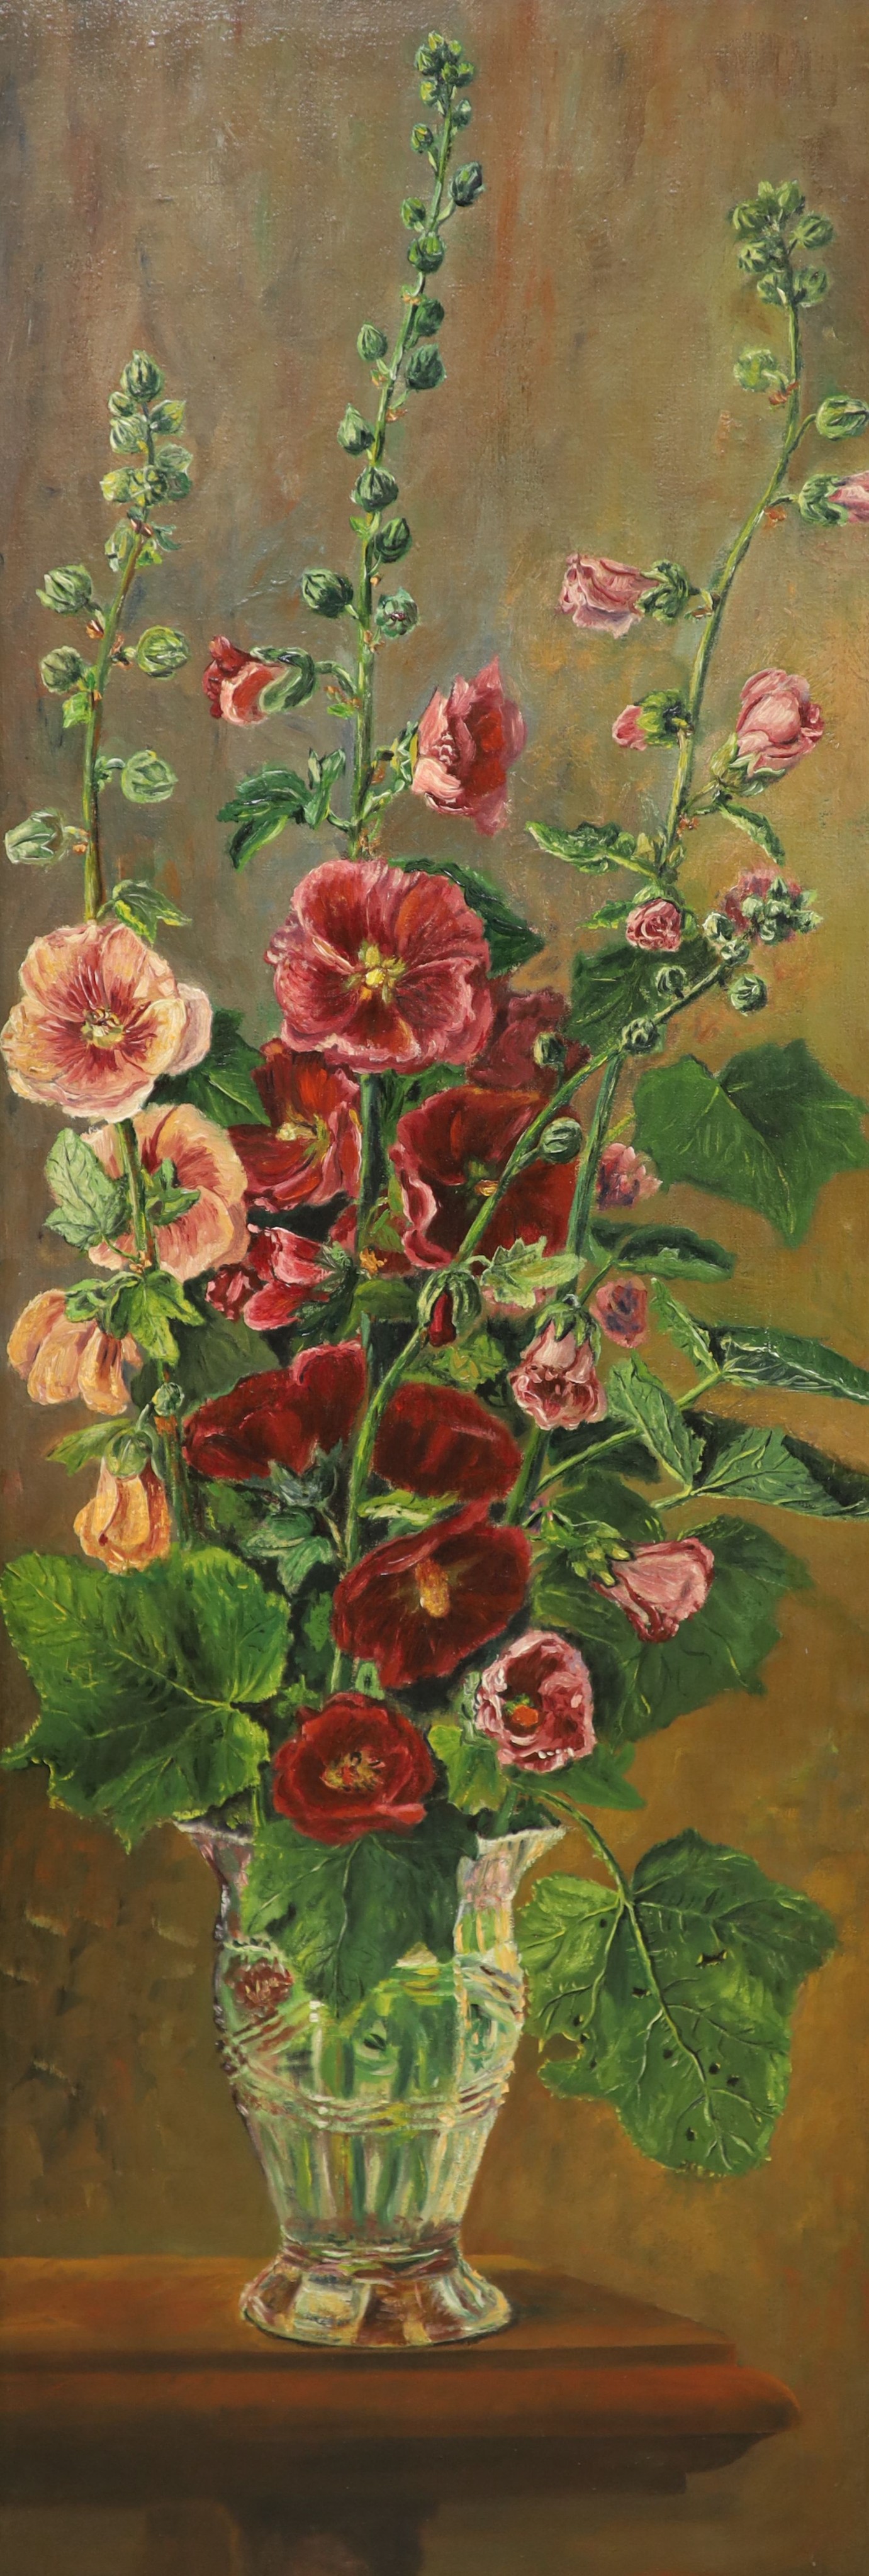 English School c.1900, pair of oils on canvas, Still lifes of irises and hollyhocks in vases, 94 x 32cm